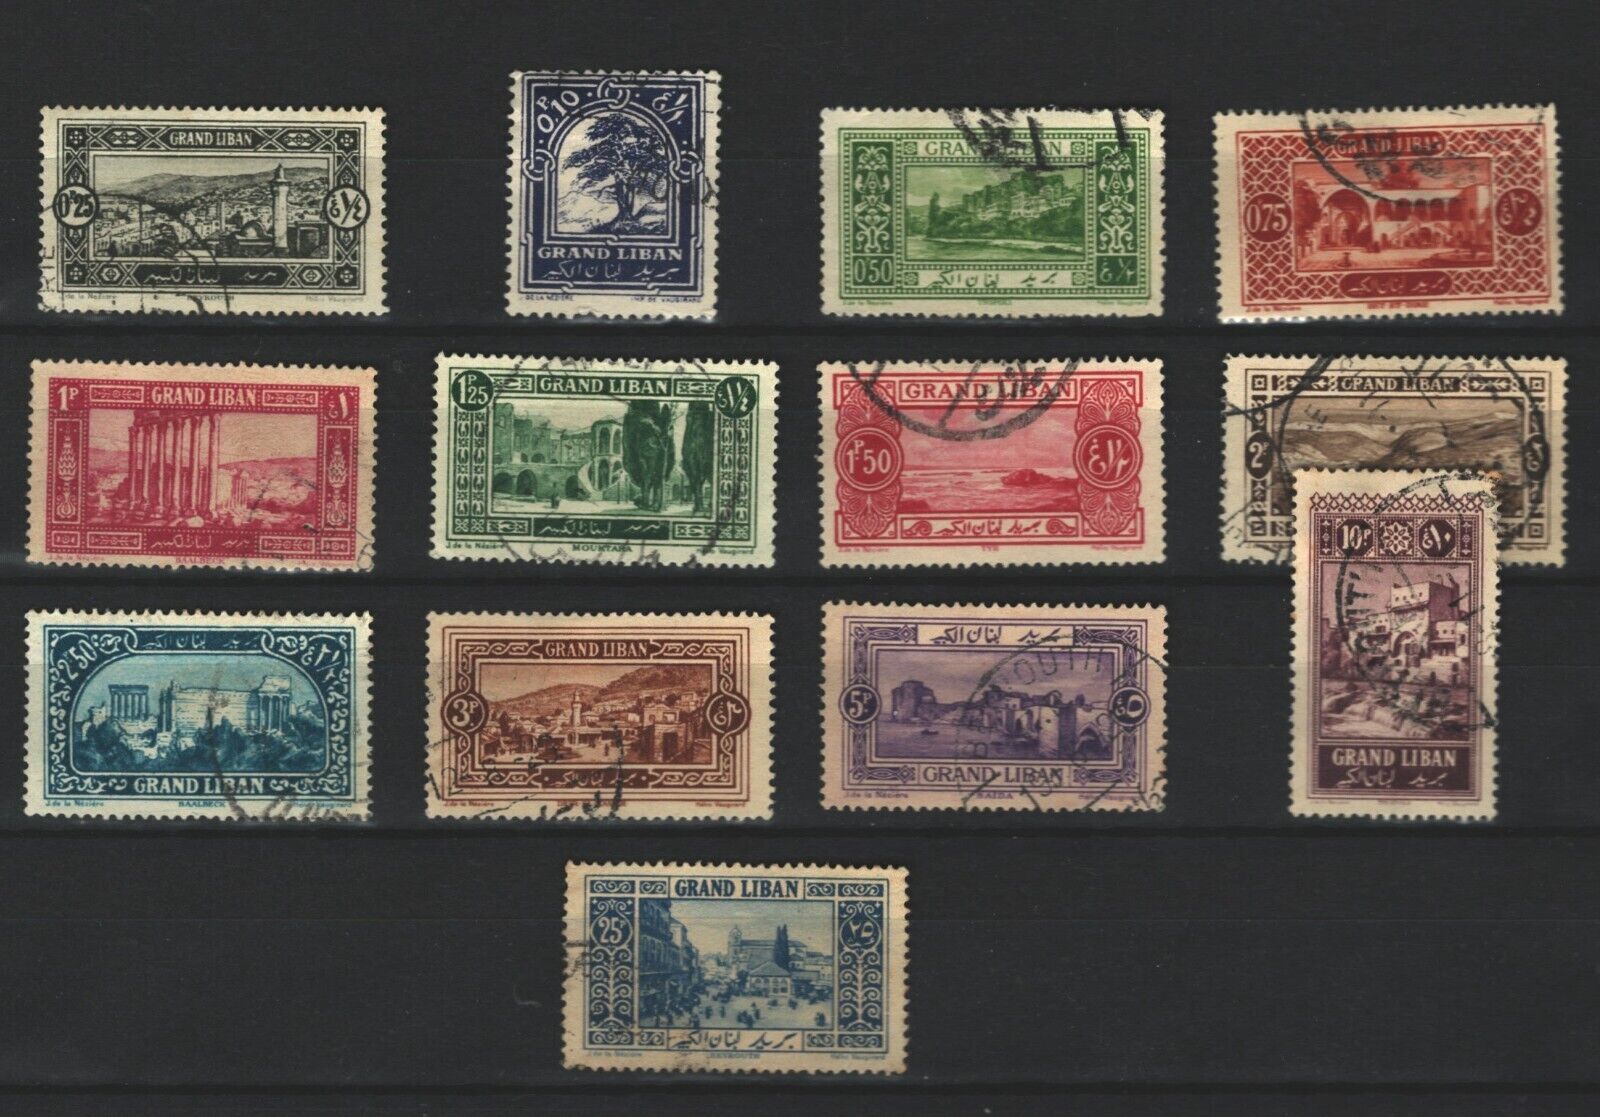 Lebanon Liban  French colonies Postal USED COMPLETE SET of STAMPS LOT ( Leb 56) Без бренда